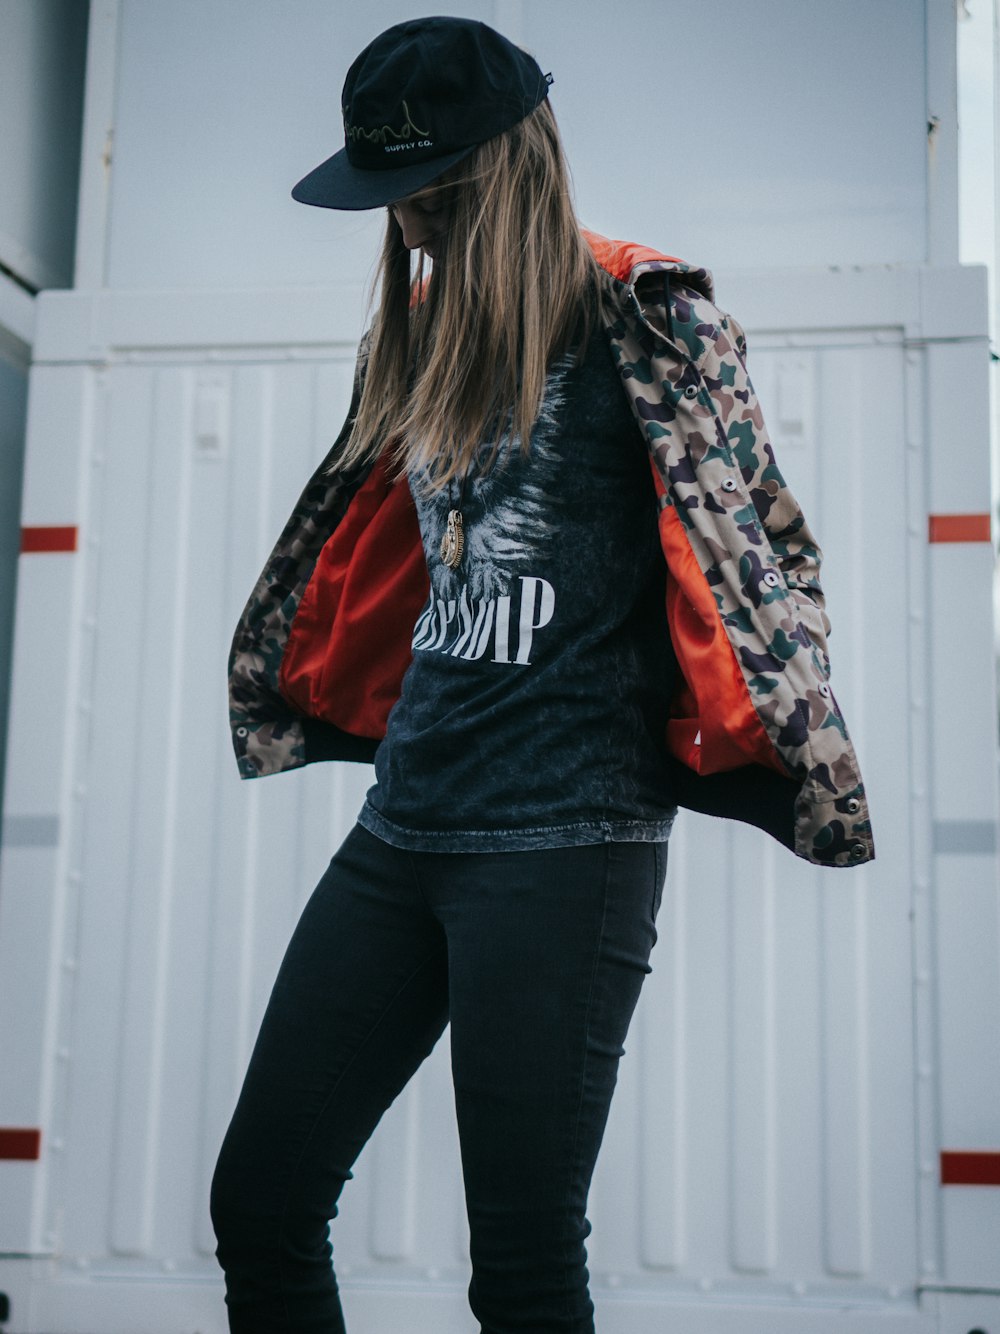 woman in black and red jacket and black pants wearing black cowboy hat